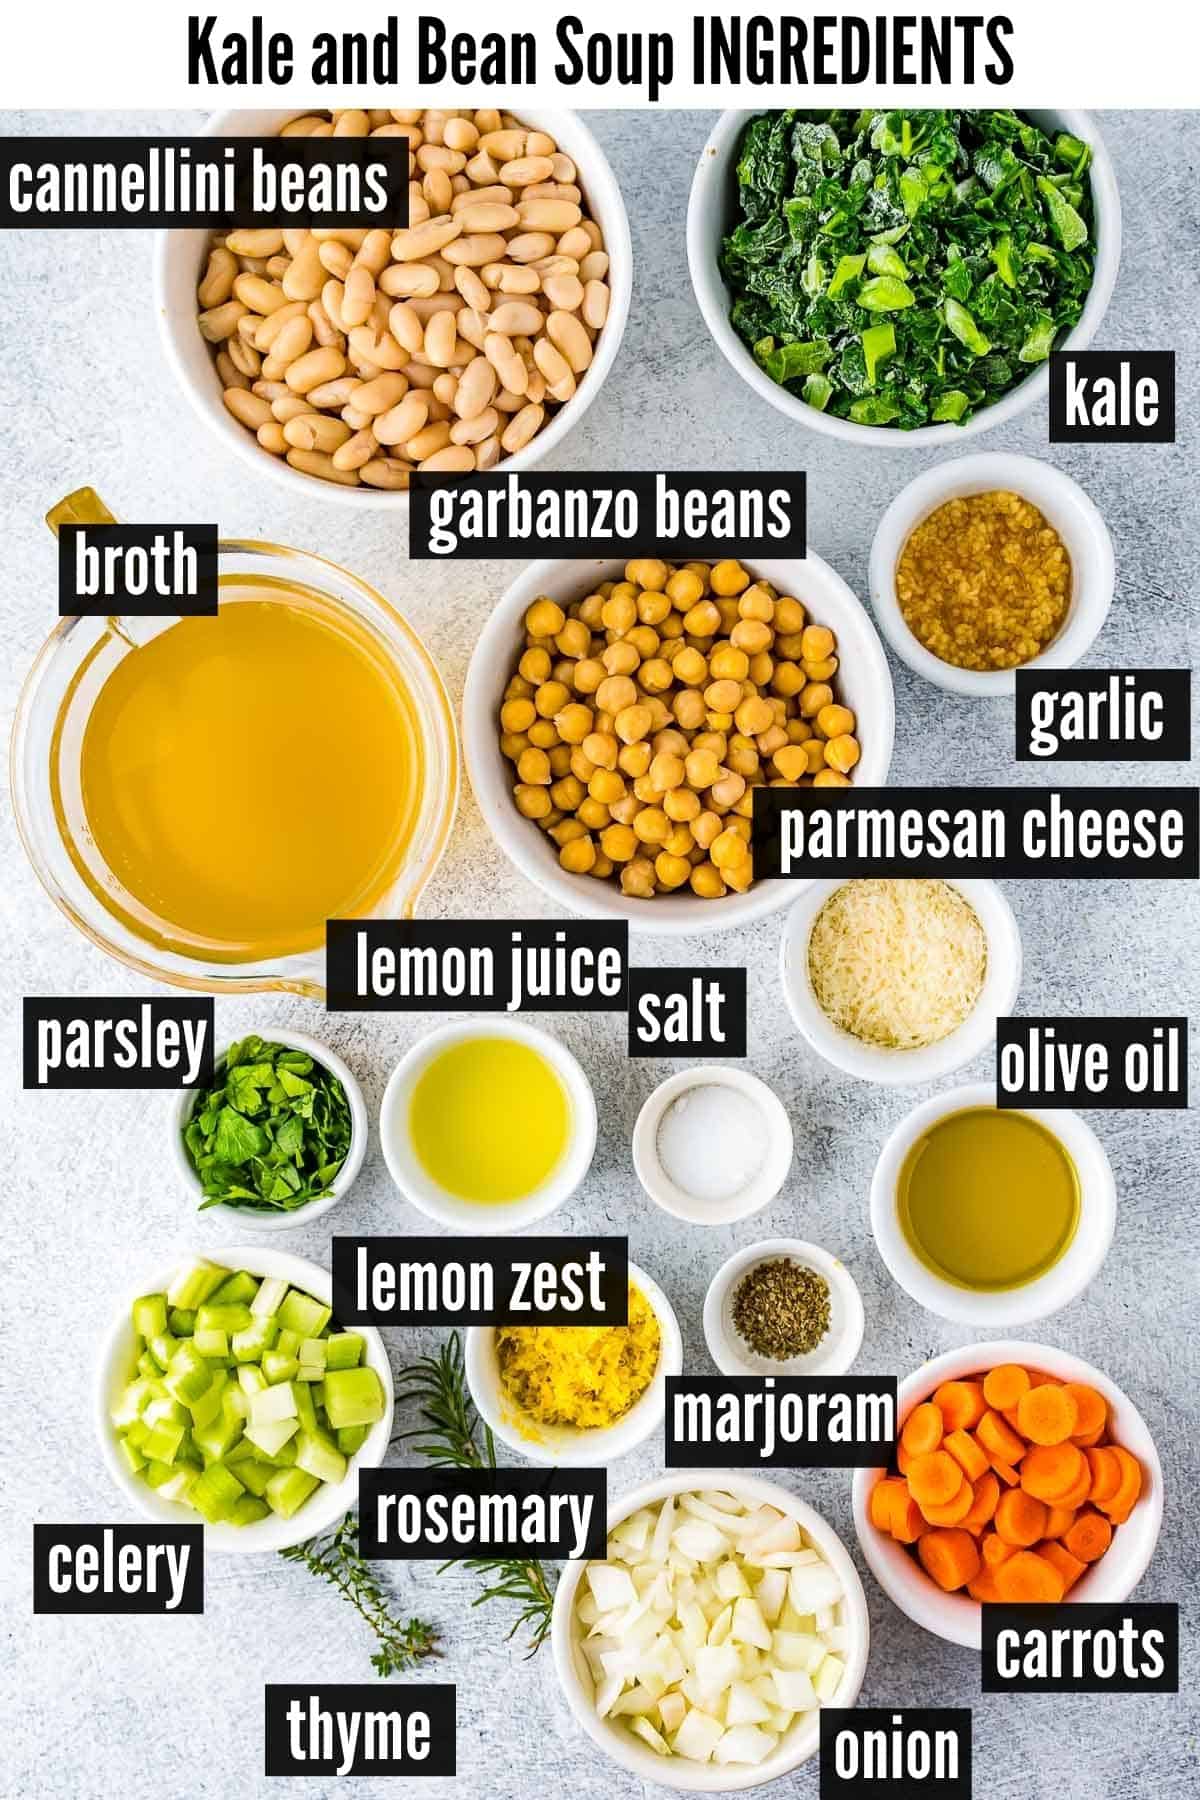 kale and bean soup labelled ingredients